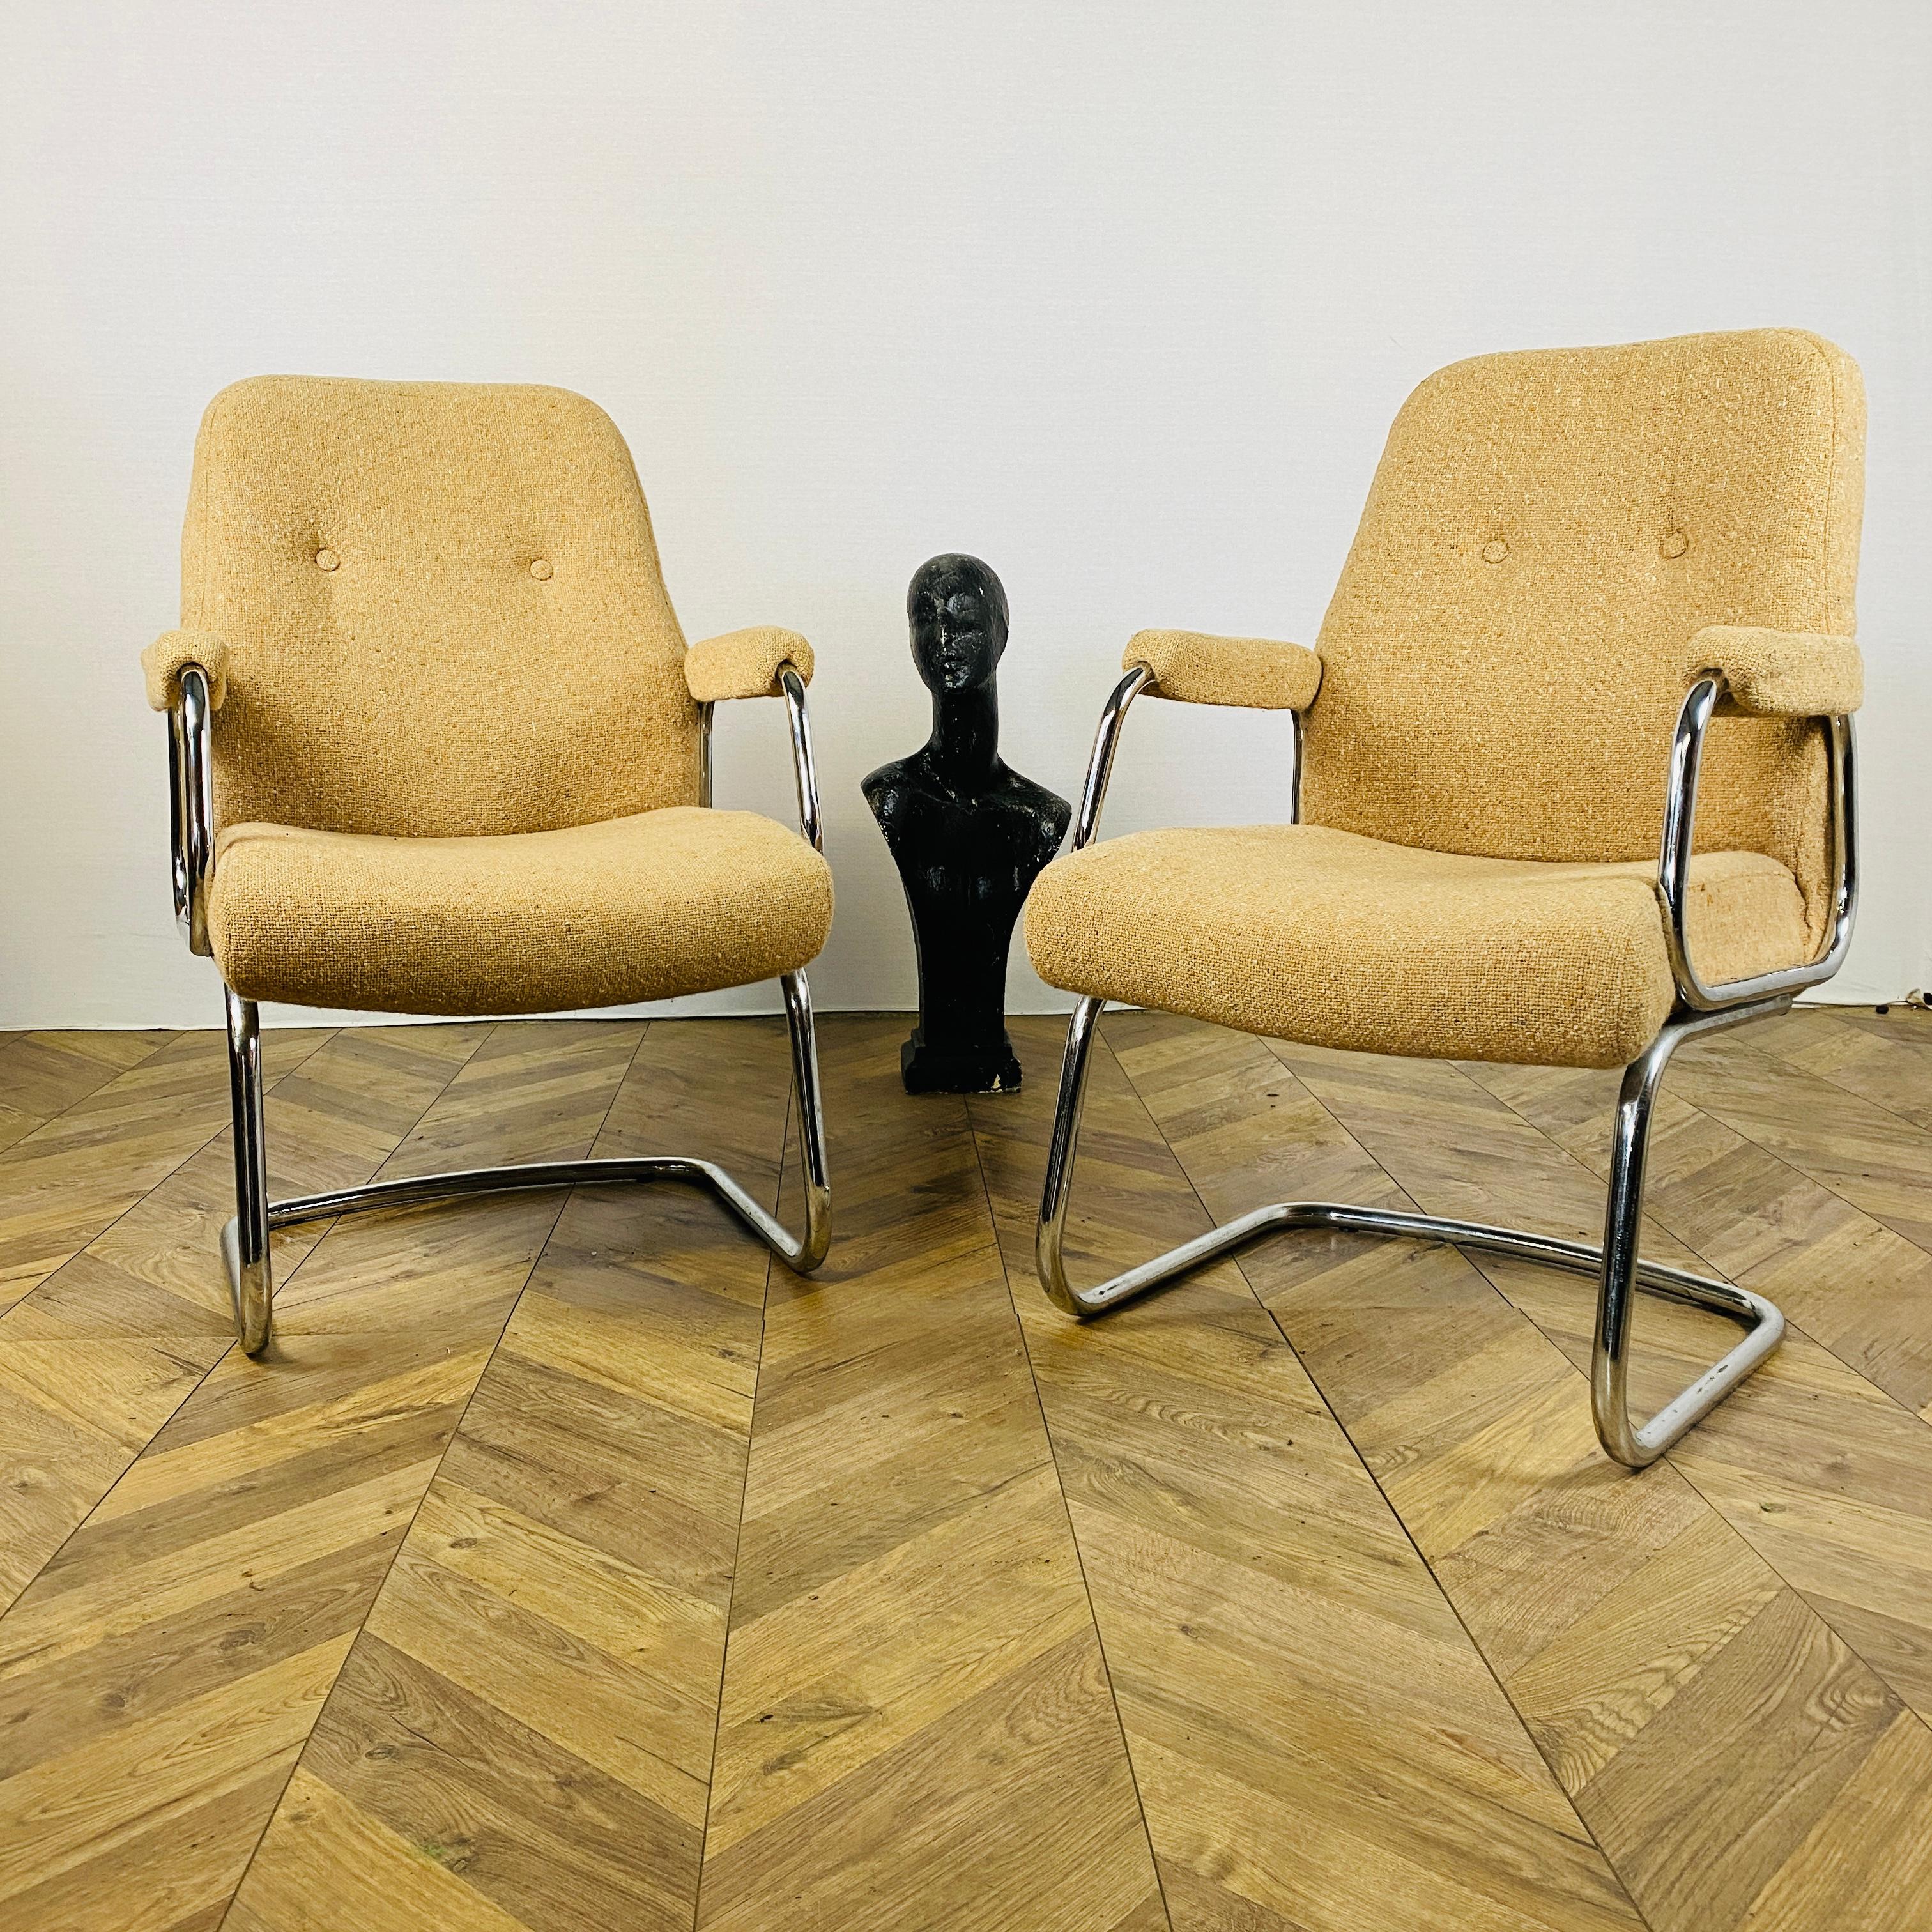 A pair of mid-century, Modernist armchairs made in England by Renowned Manufacturers; Evertaut International.

Boasting clean lines and in good vintage condition, the chairs frames are made from chrome and fabric seat & back, which provide a